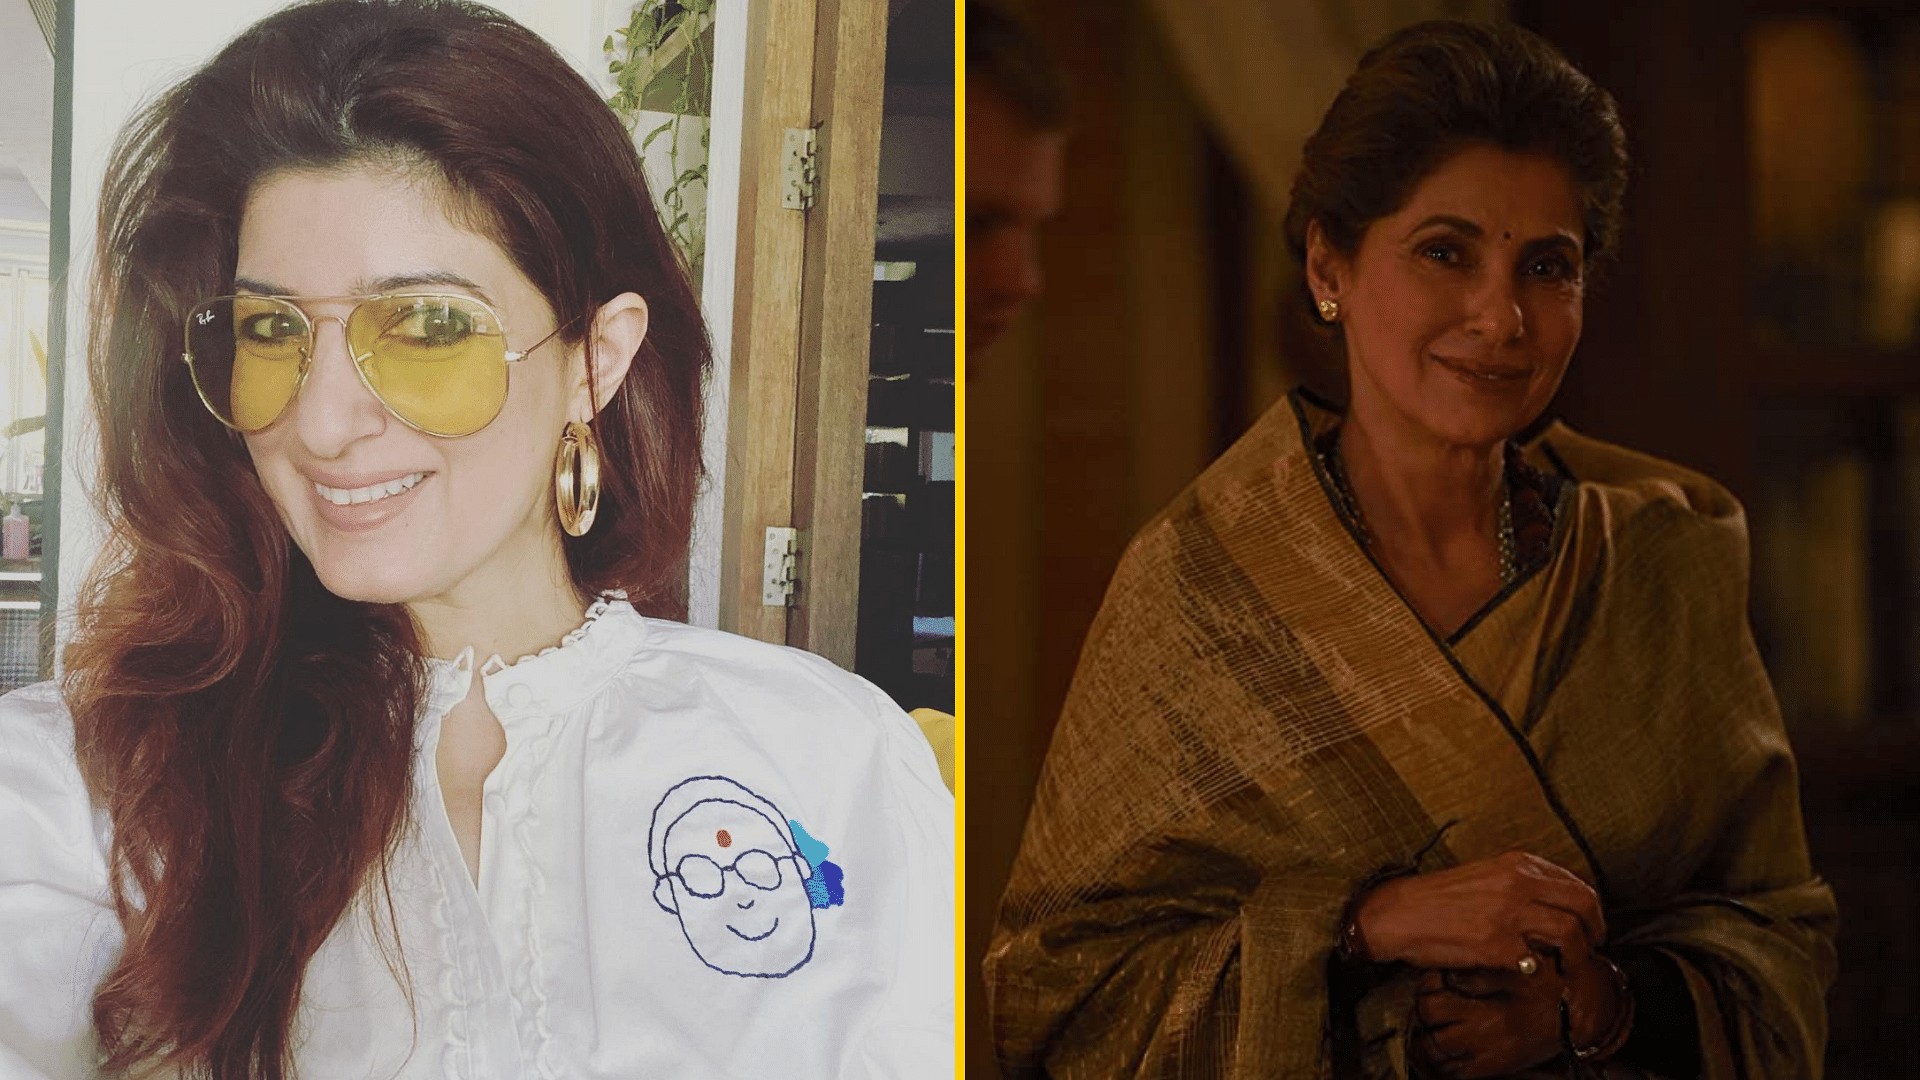 Twinkle Khanna gushed over her mother Dimple Kapadia's performance in web series <i>Tandav</i>.